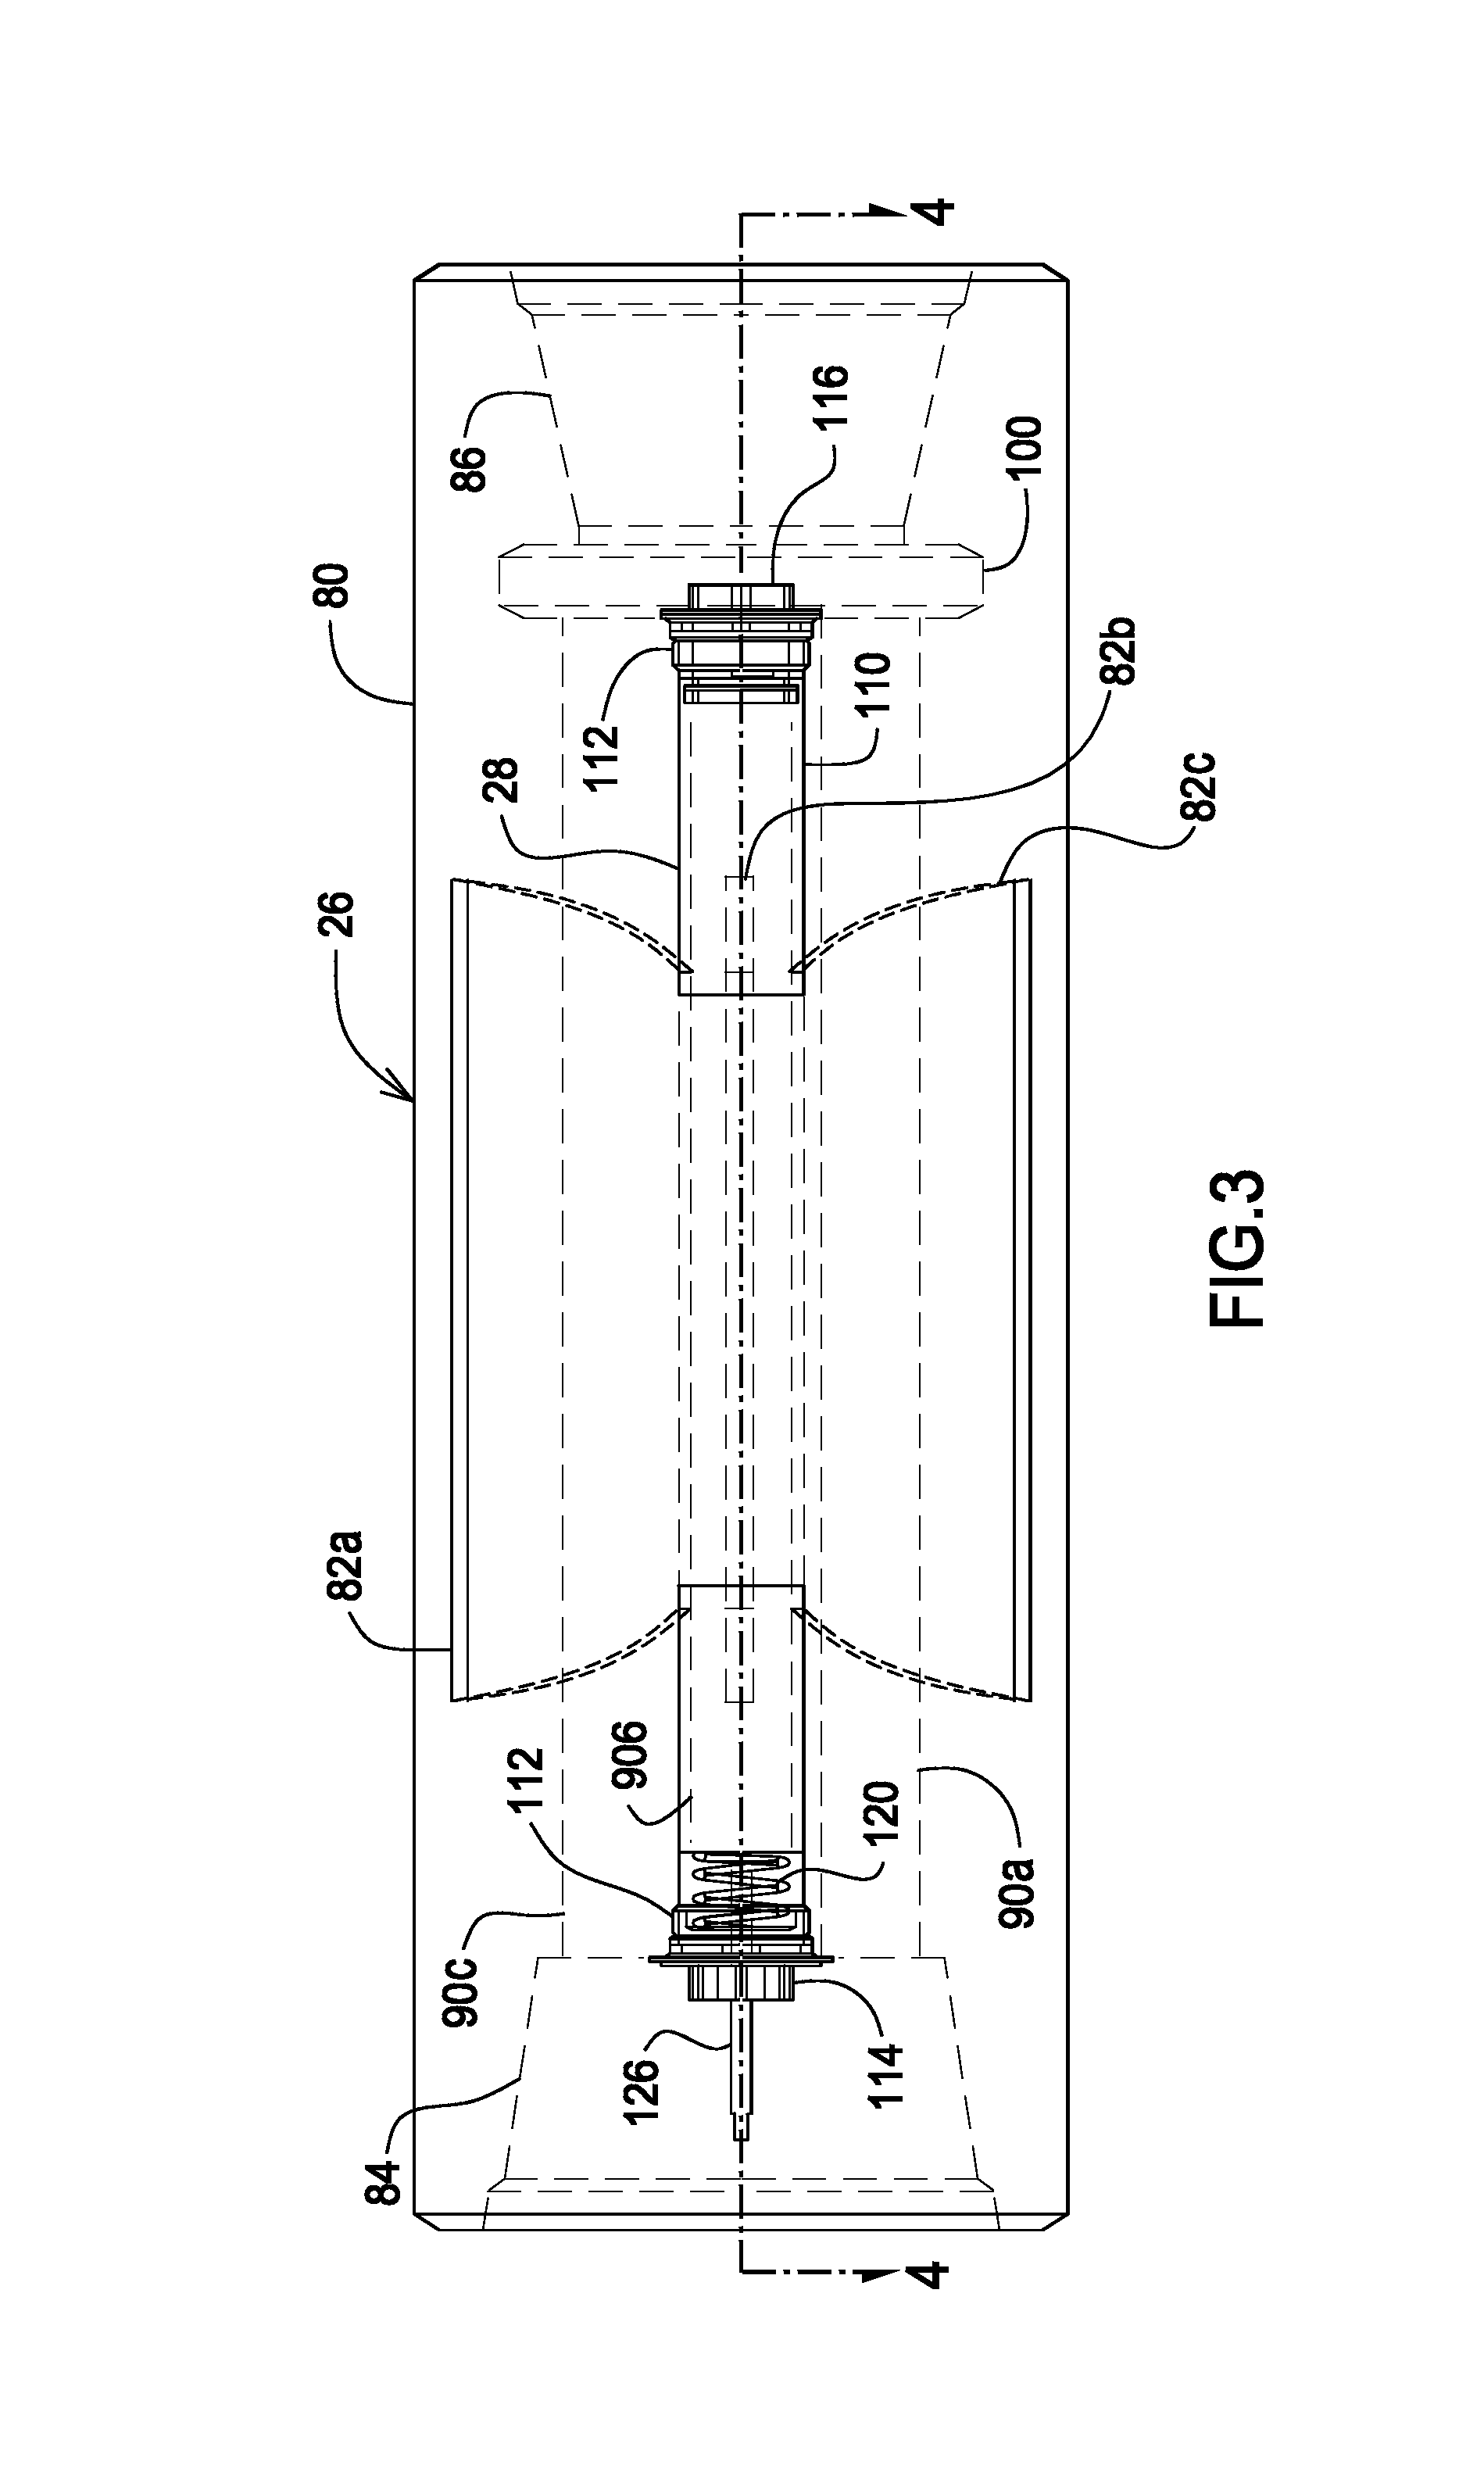 Electronic roll indexing compensation in a drilling system and method